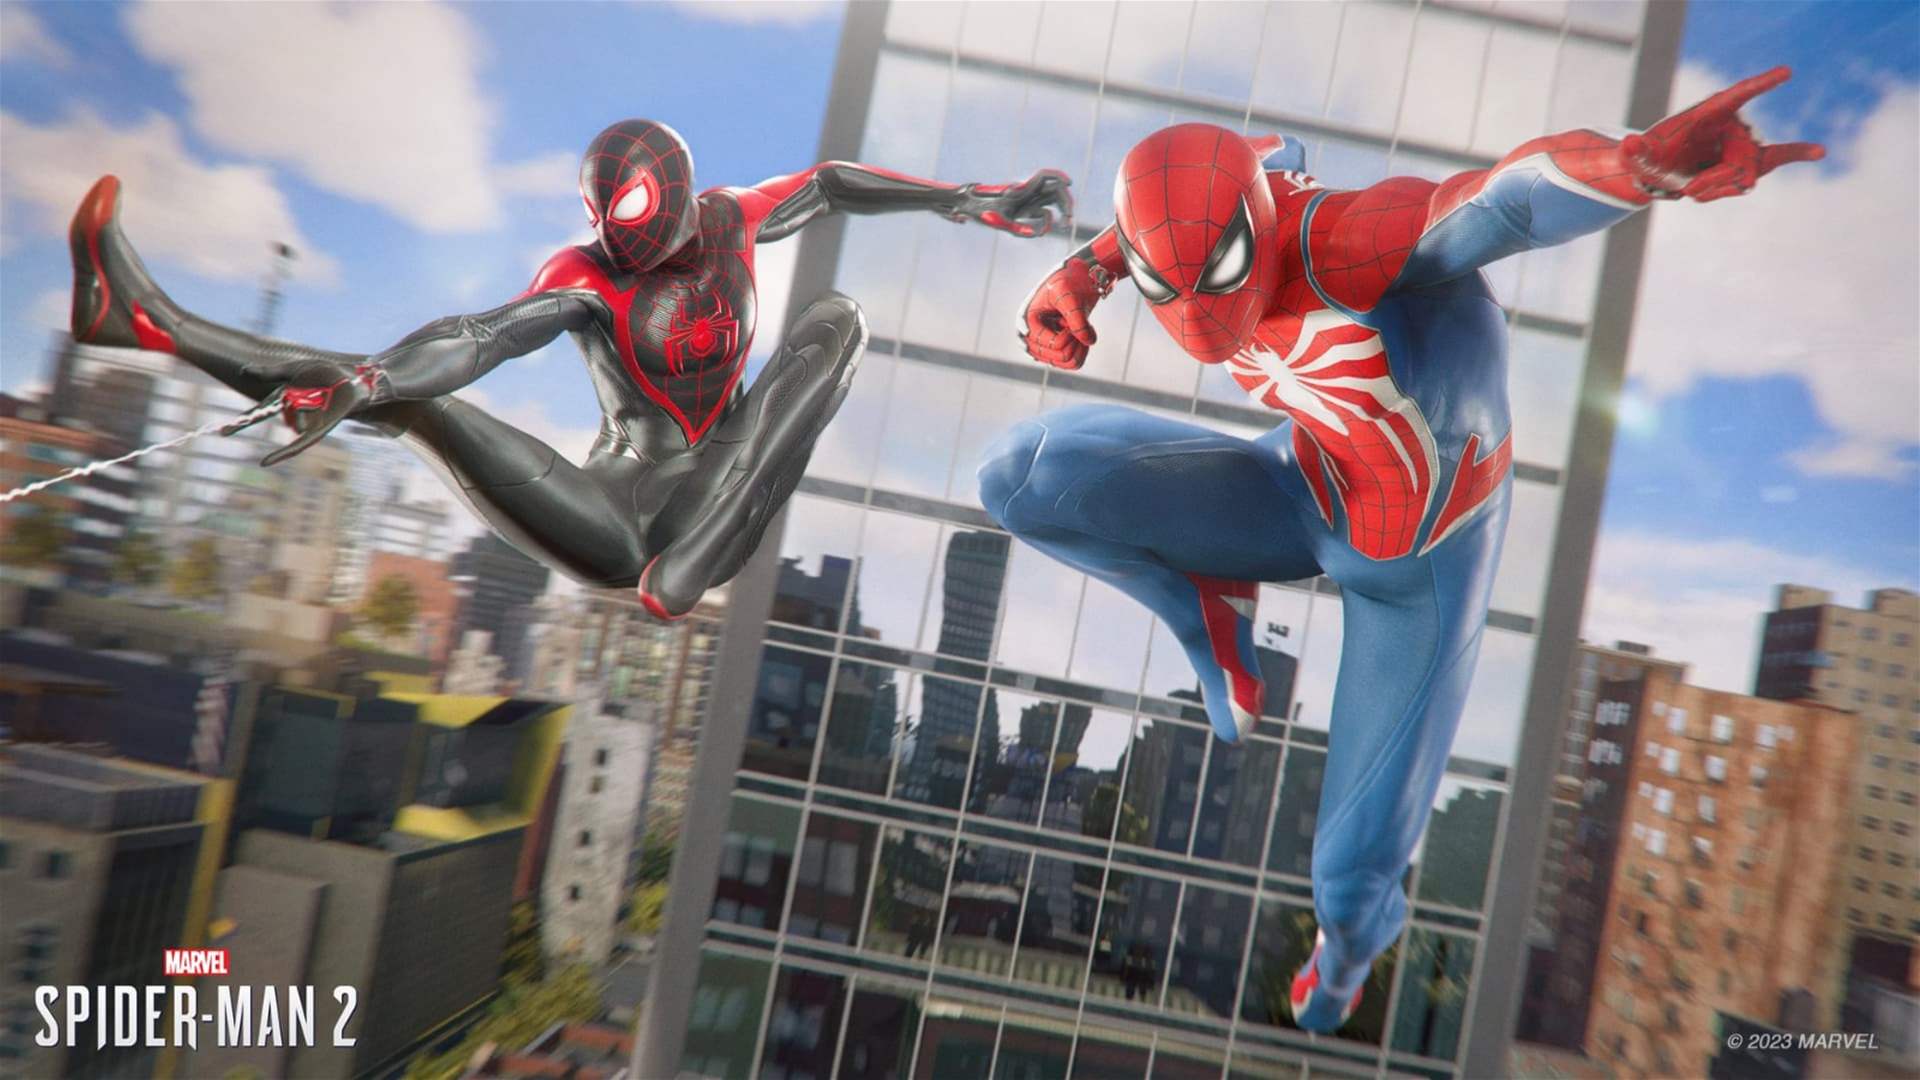 &#39;Record-breaking&#39; debut: Marvel&#39;s Spider-Man 2 sells 2.5 million copies in 24 hours